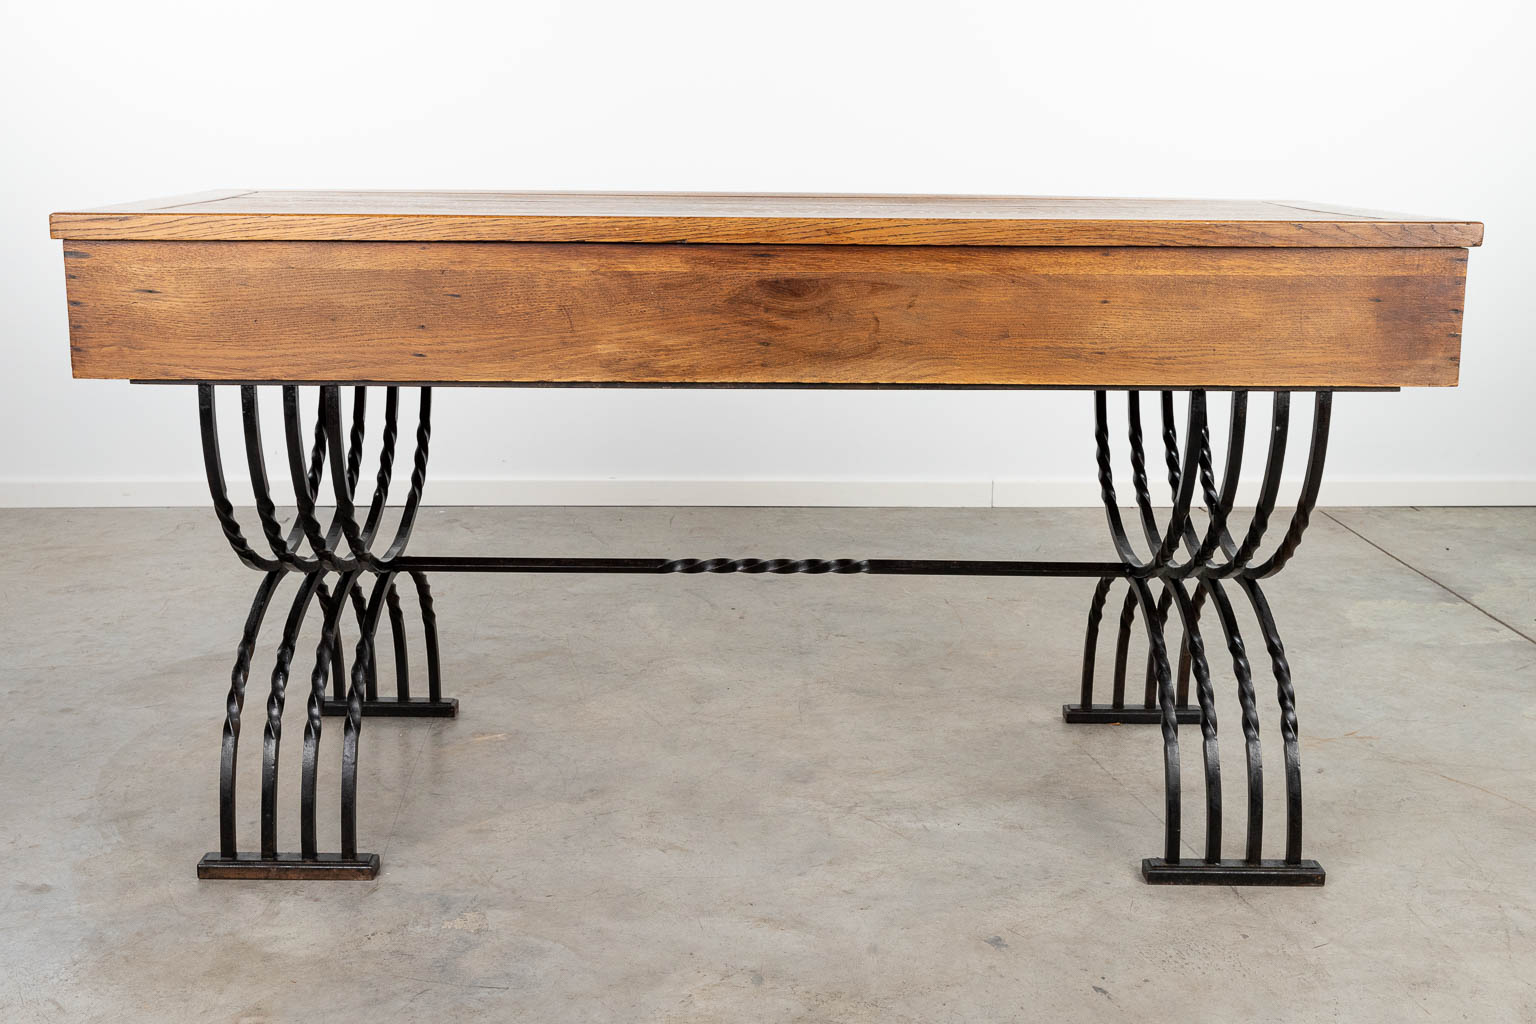 A shop counter made of wrought iron and wood. Used in the Paris Londres in Bruges. (H:85cm)